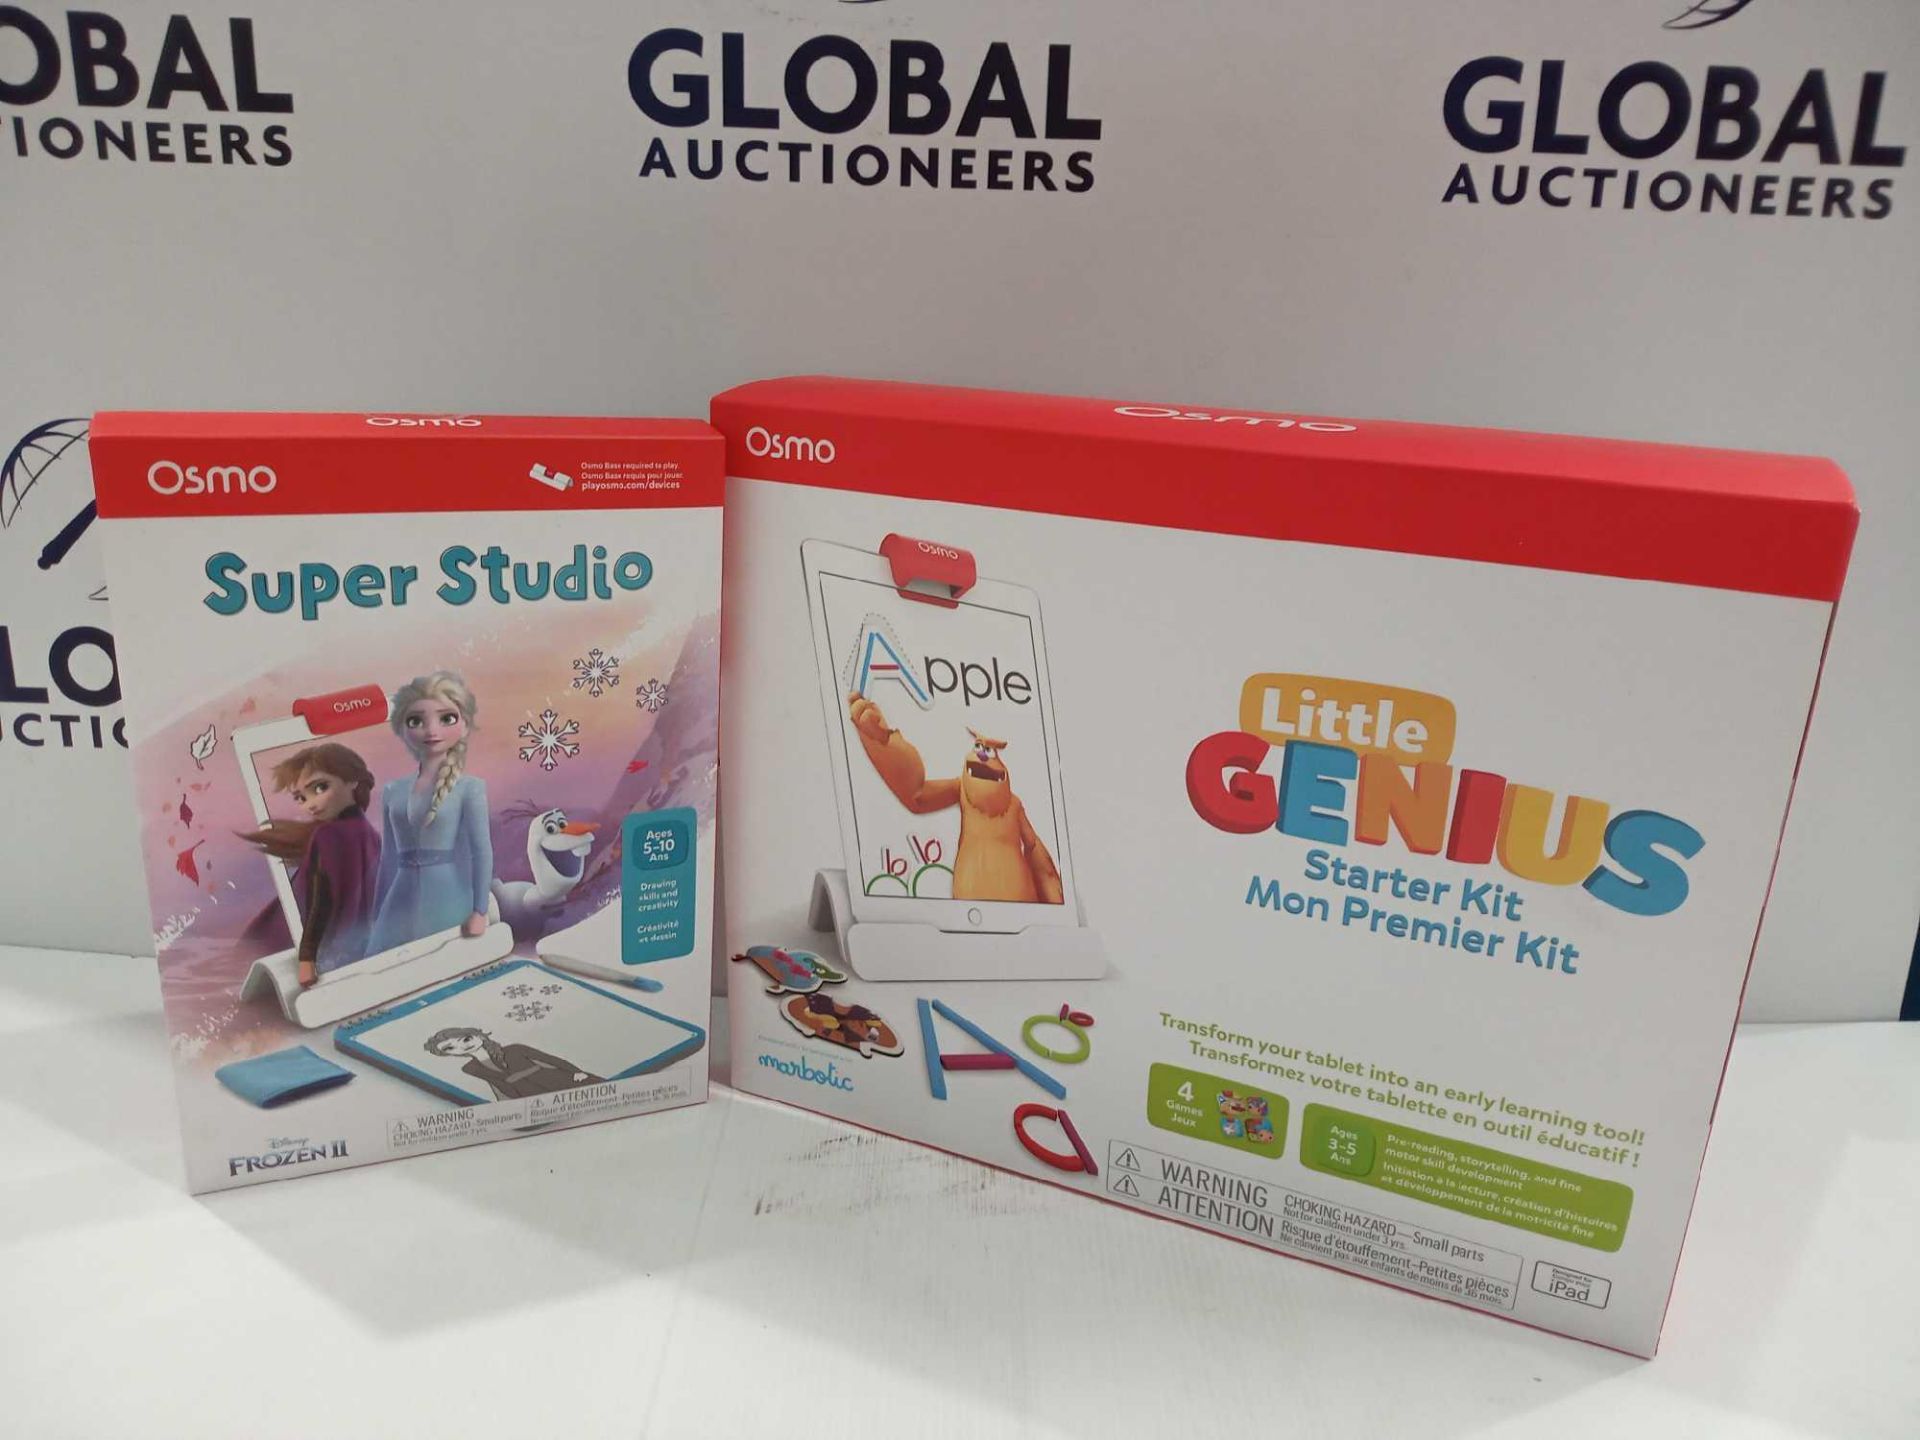 Rrp £130 Boxed Osmo Little Genius Products Handheld Starter Kit Complete With Osmo Super Studio Disn